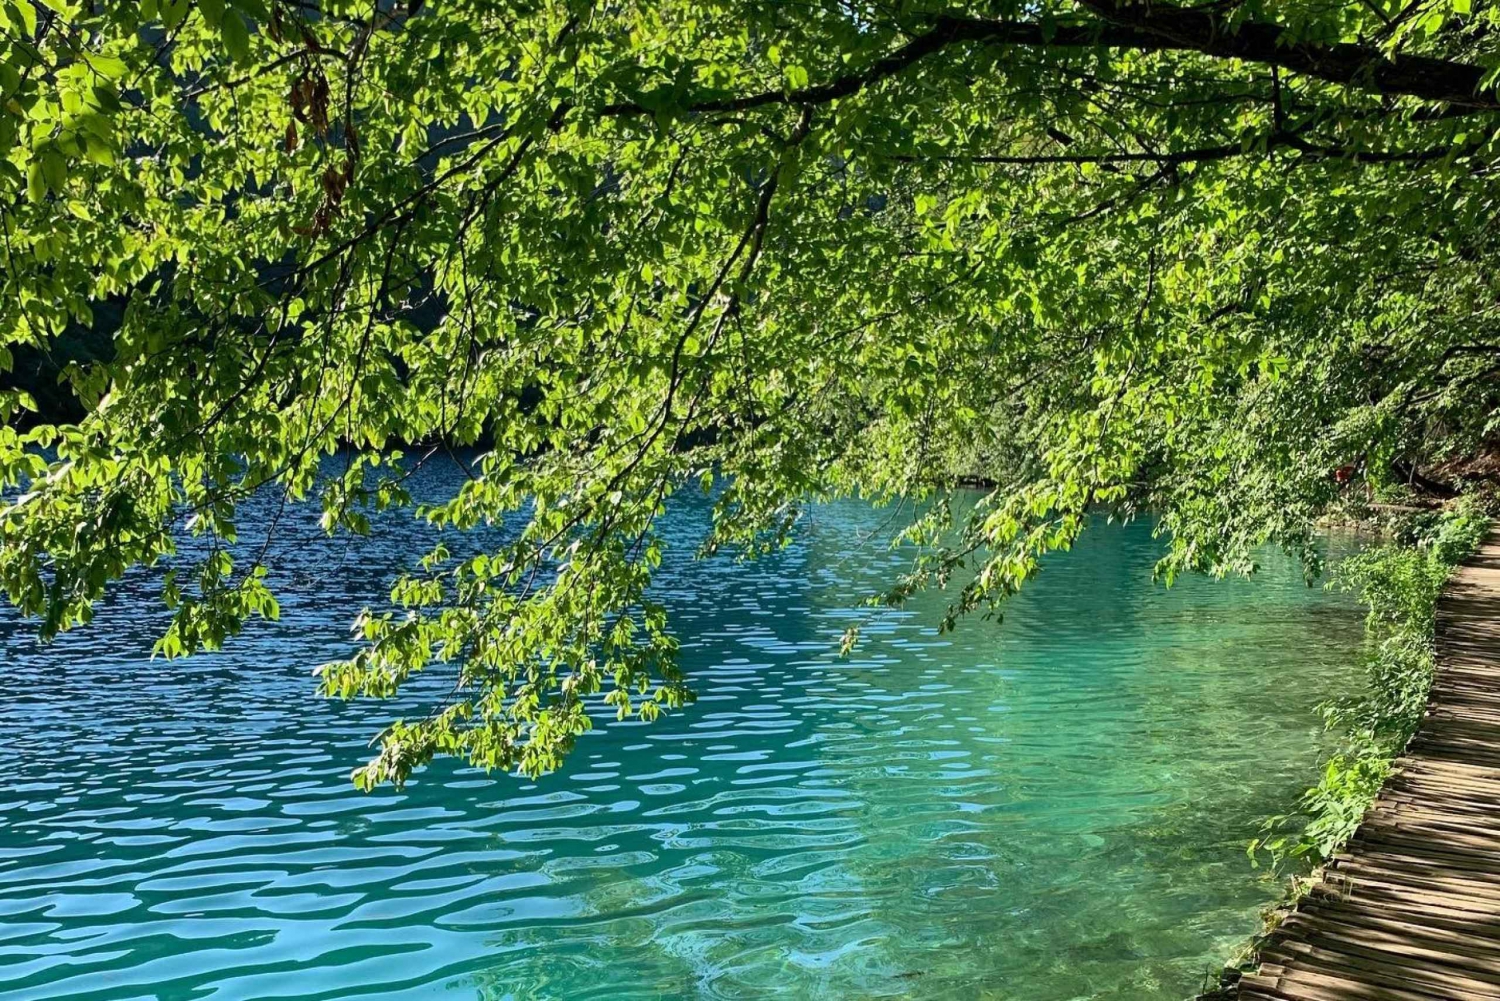 Plitvice Lakes National Park: Walking, Boat, and Train Tour